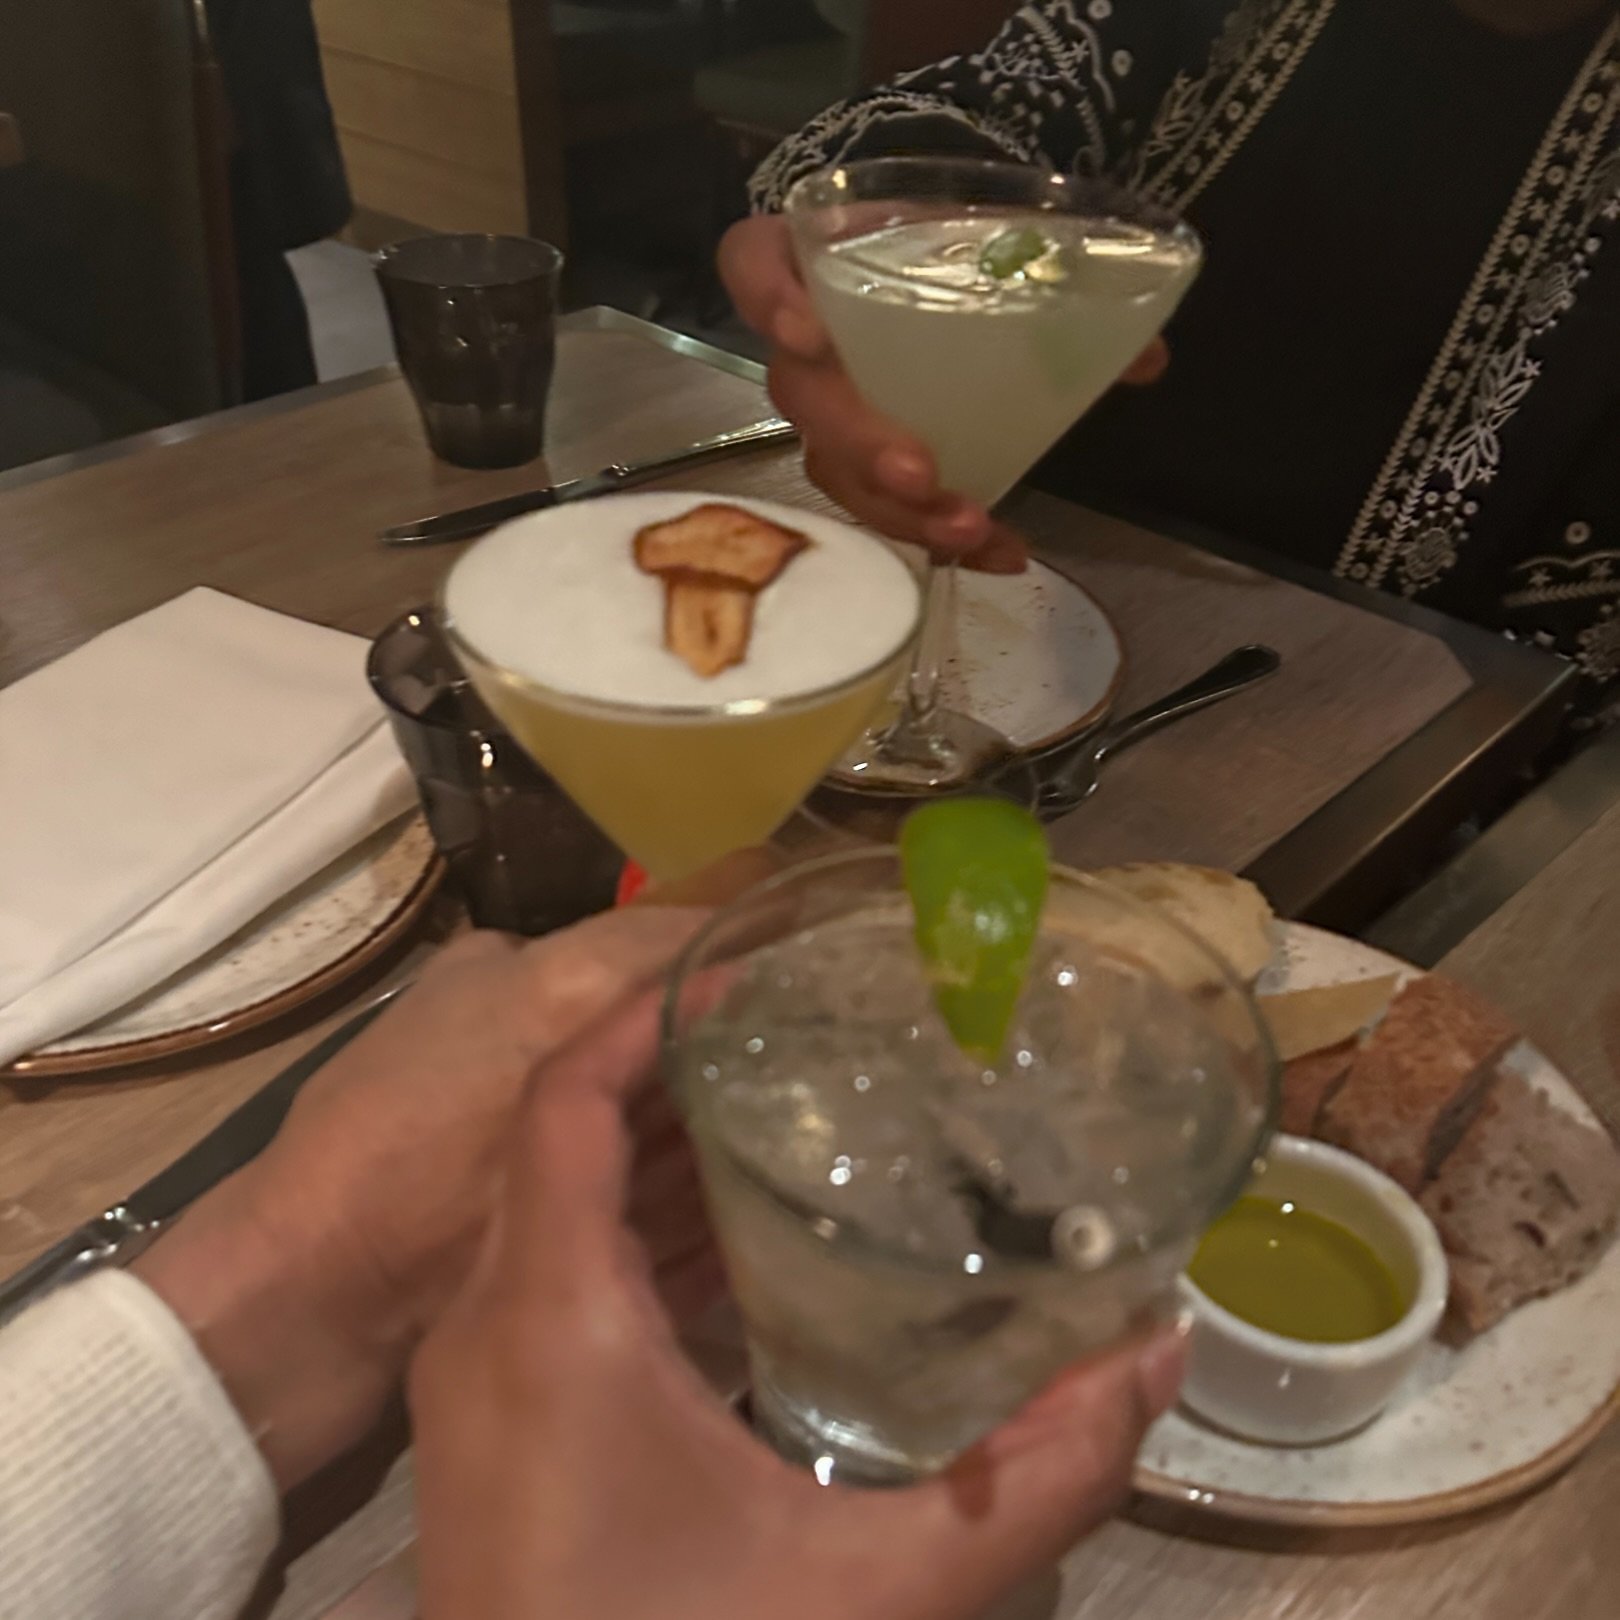 drinks with my ladies. love traveling with these women &mdash; maybe because they love a fabulous cocktail, too. like mother like daughter, like niece like aunt lol. x, z.